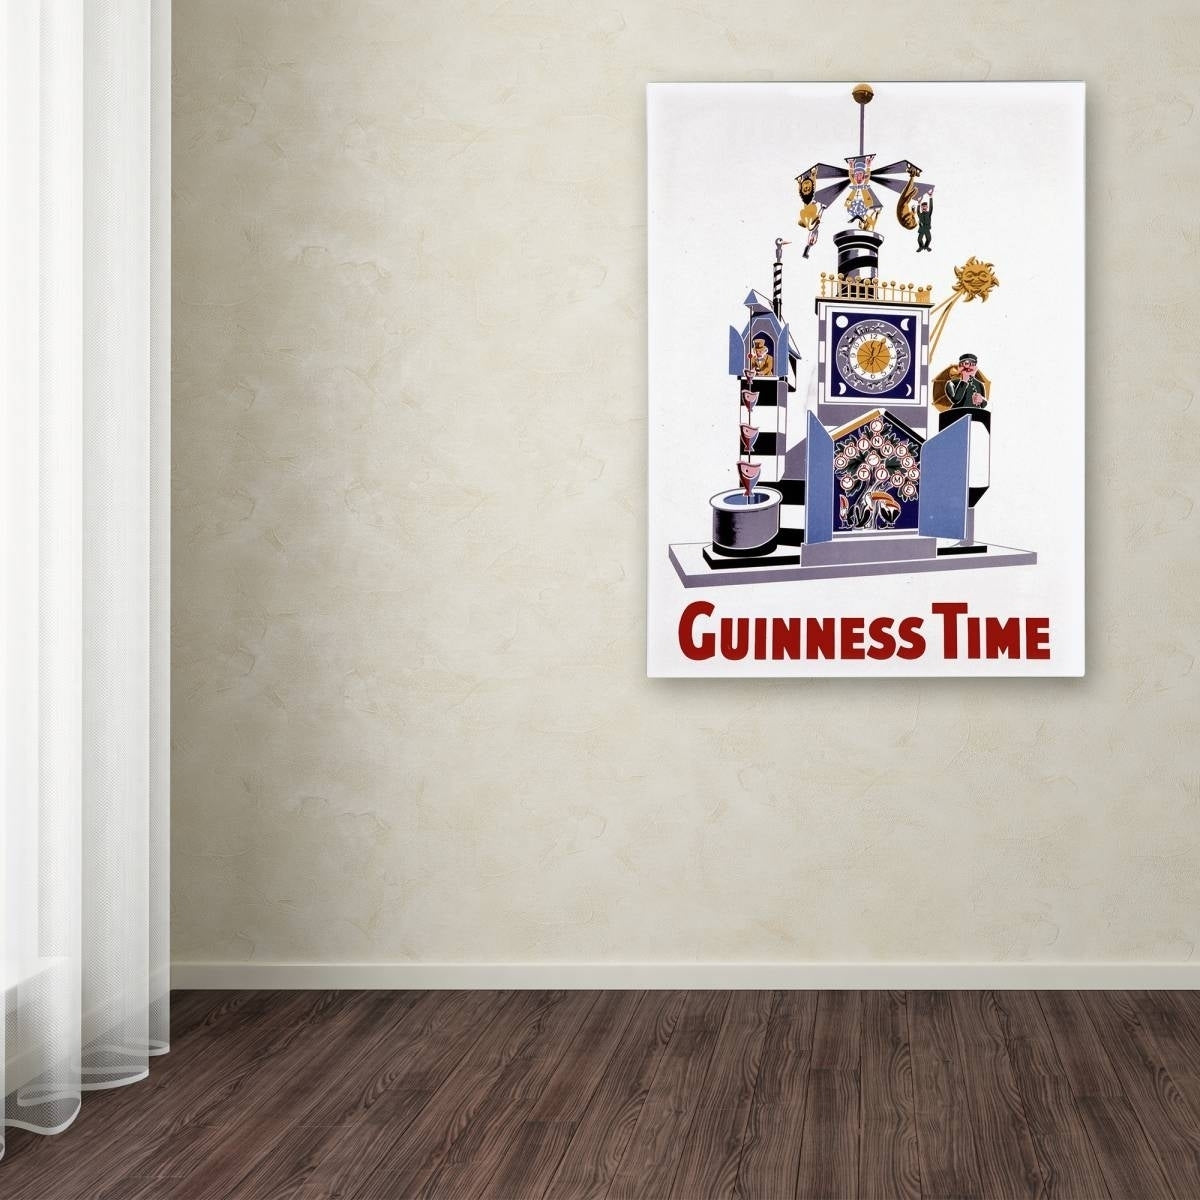 Guinness Brewery 'Guinness Time I' Canvas Art